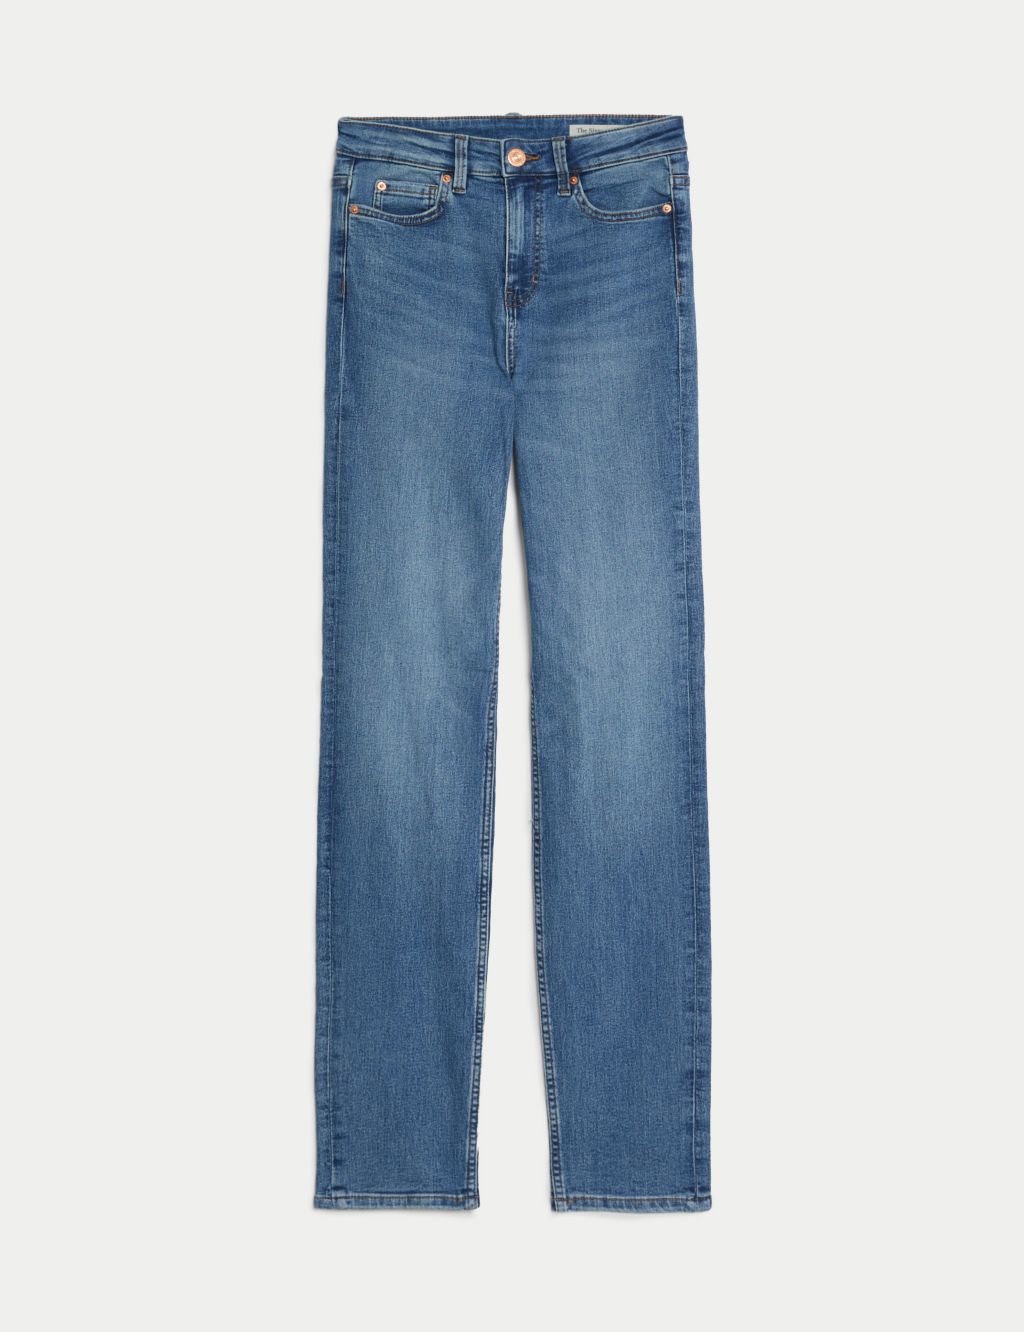 Sienna Straight Leg Jeans with Stretch 1 of 6